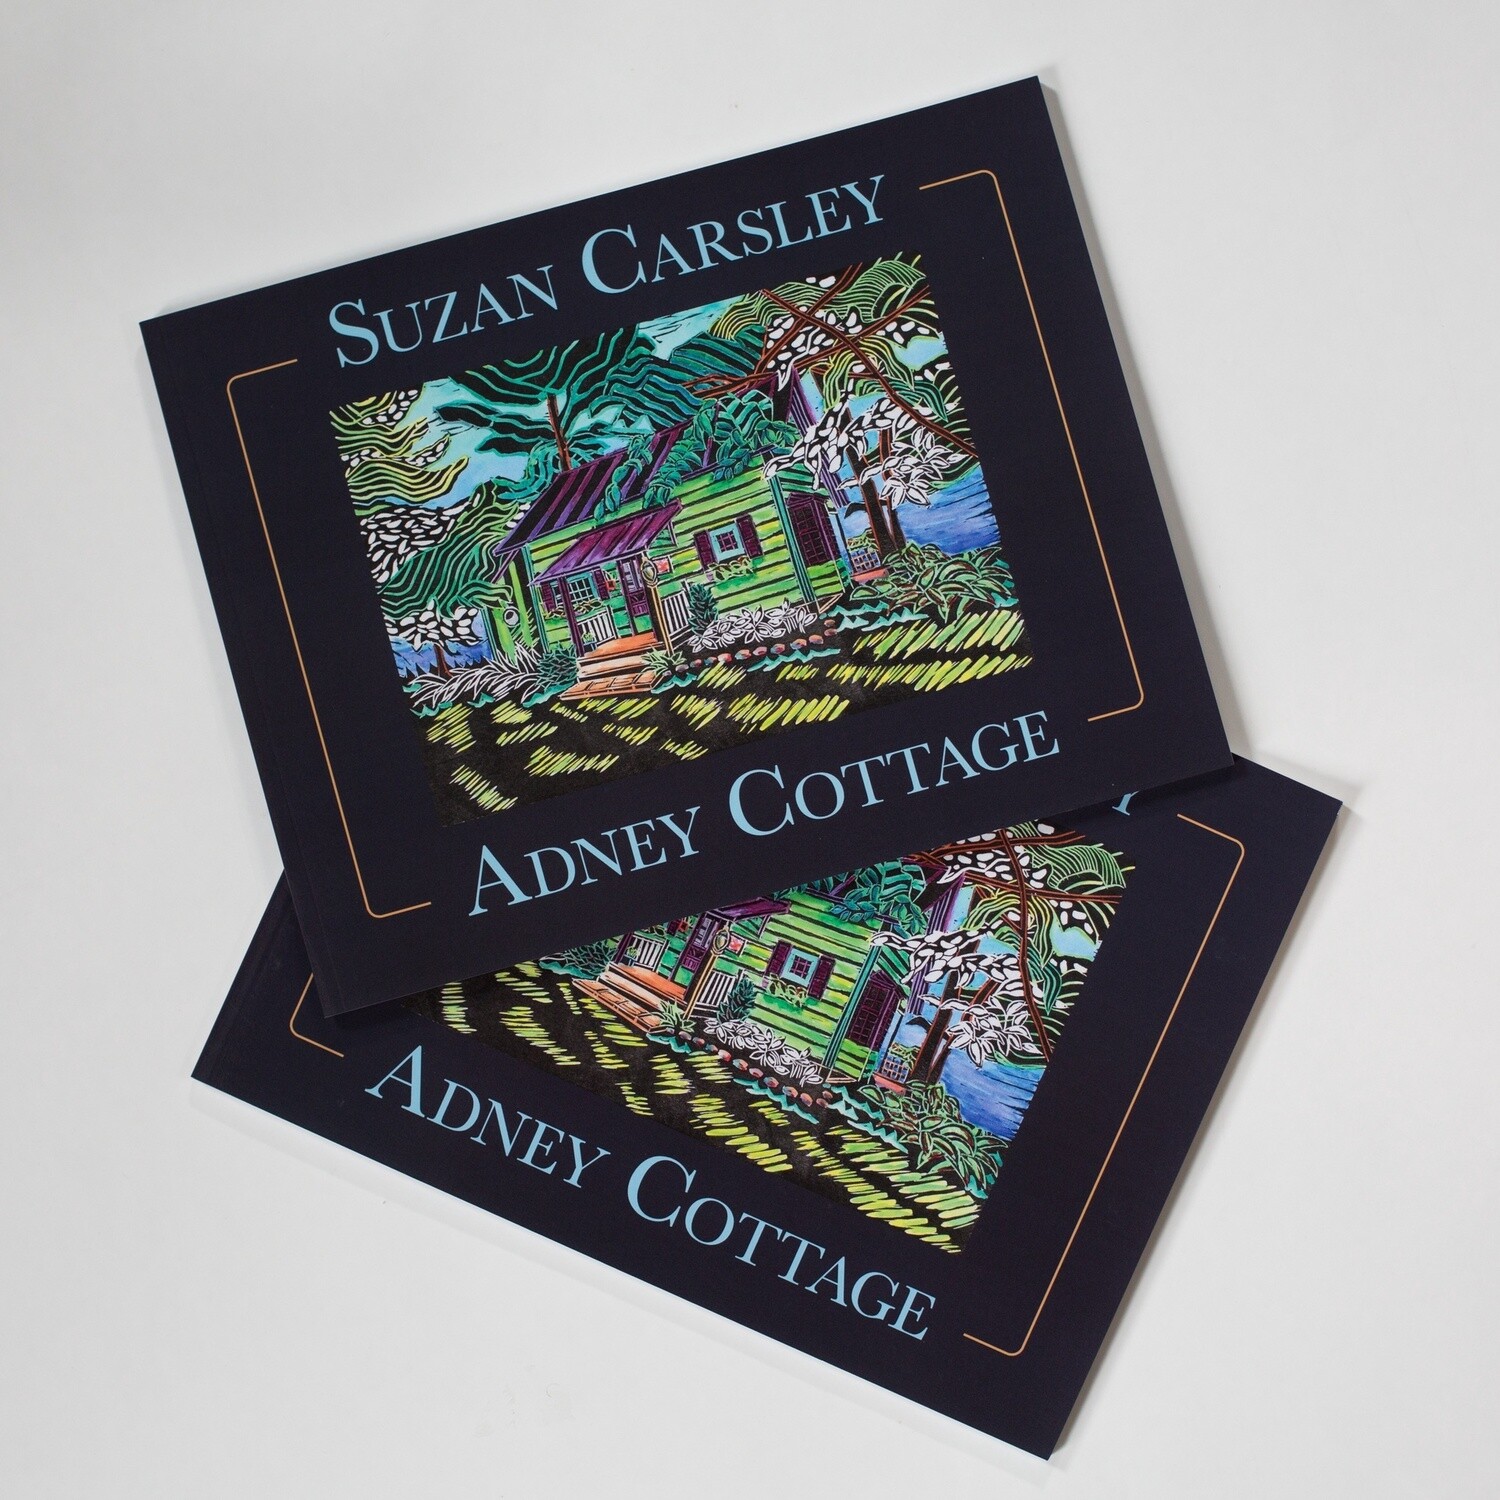 Adney Cottage Art book by Suzan Carsley